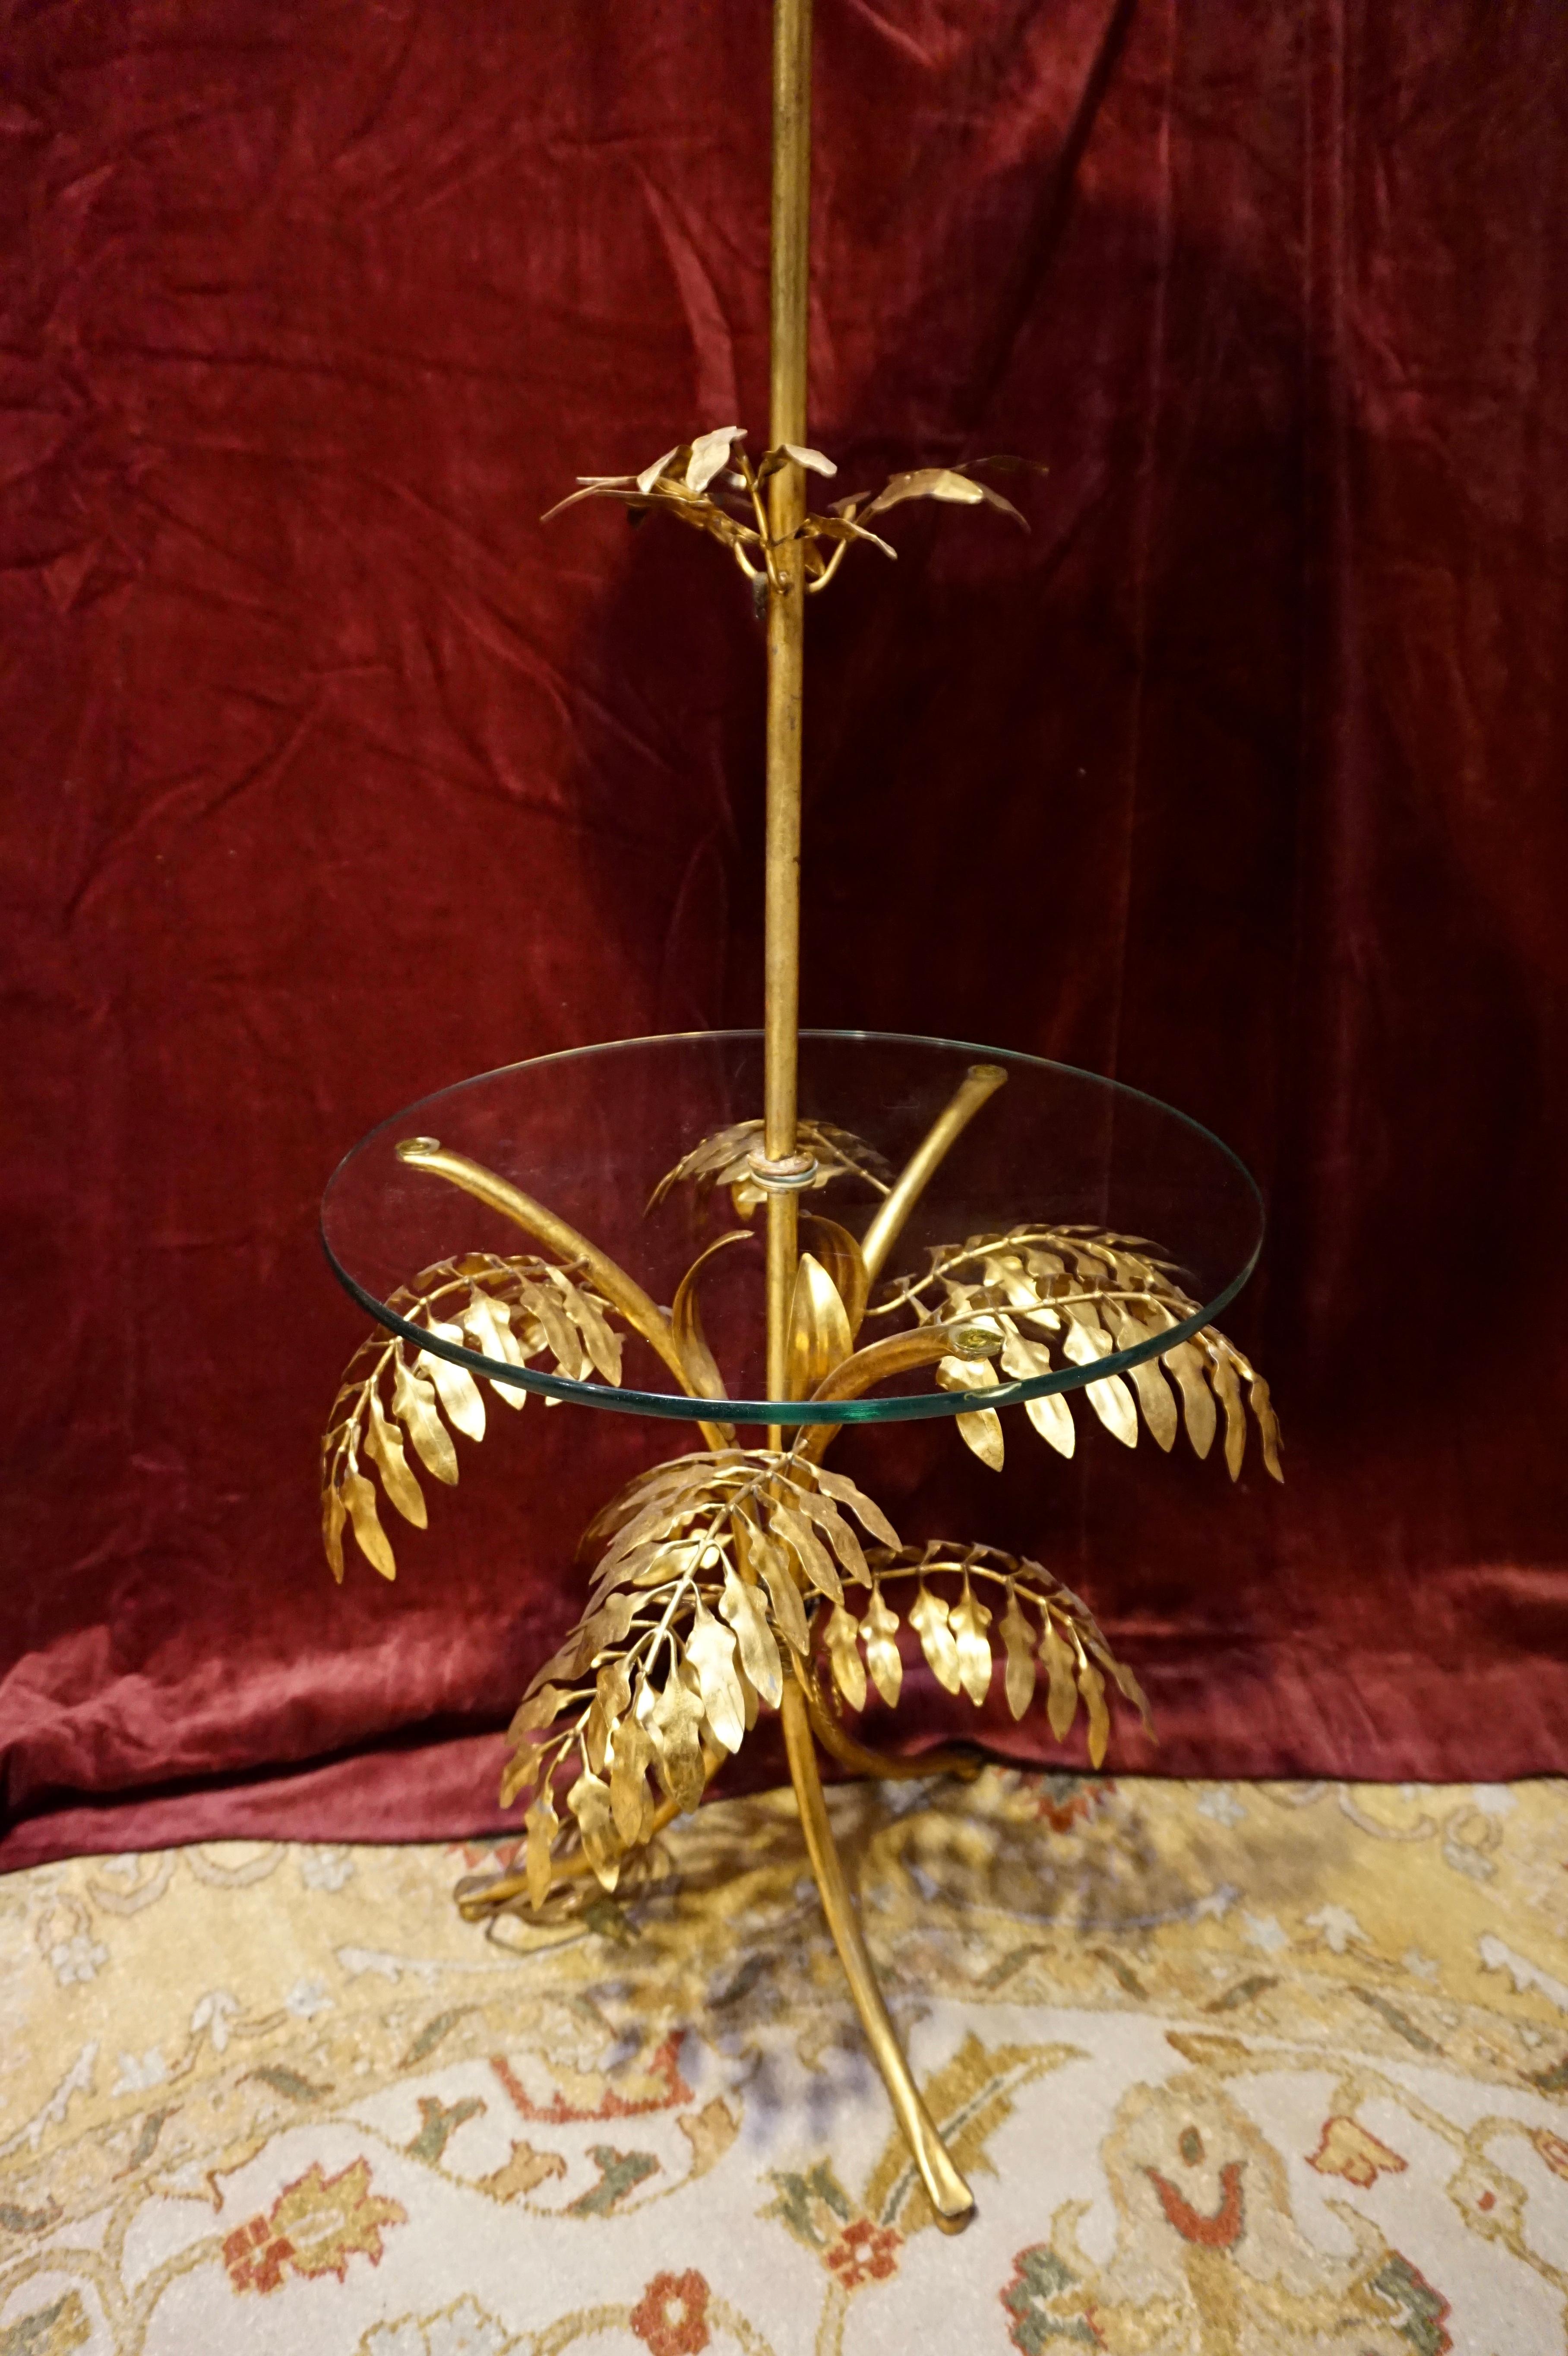 Rare Mid Century Italian gold leaf floor lamp. Beautifully hand constructed from metal with central glass that serves as a side table. Lovely decorative cascading leaf pattern is featured in this artistic and conversational lamp. Several tags that